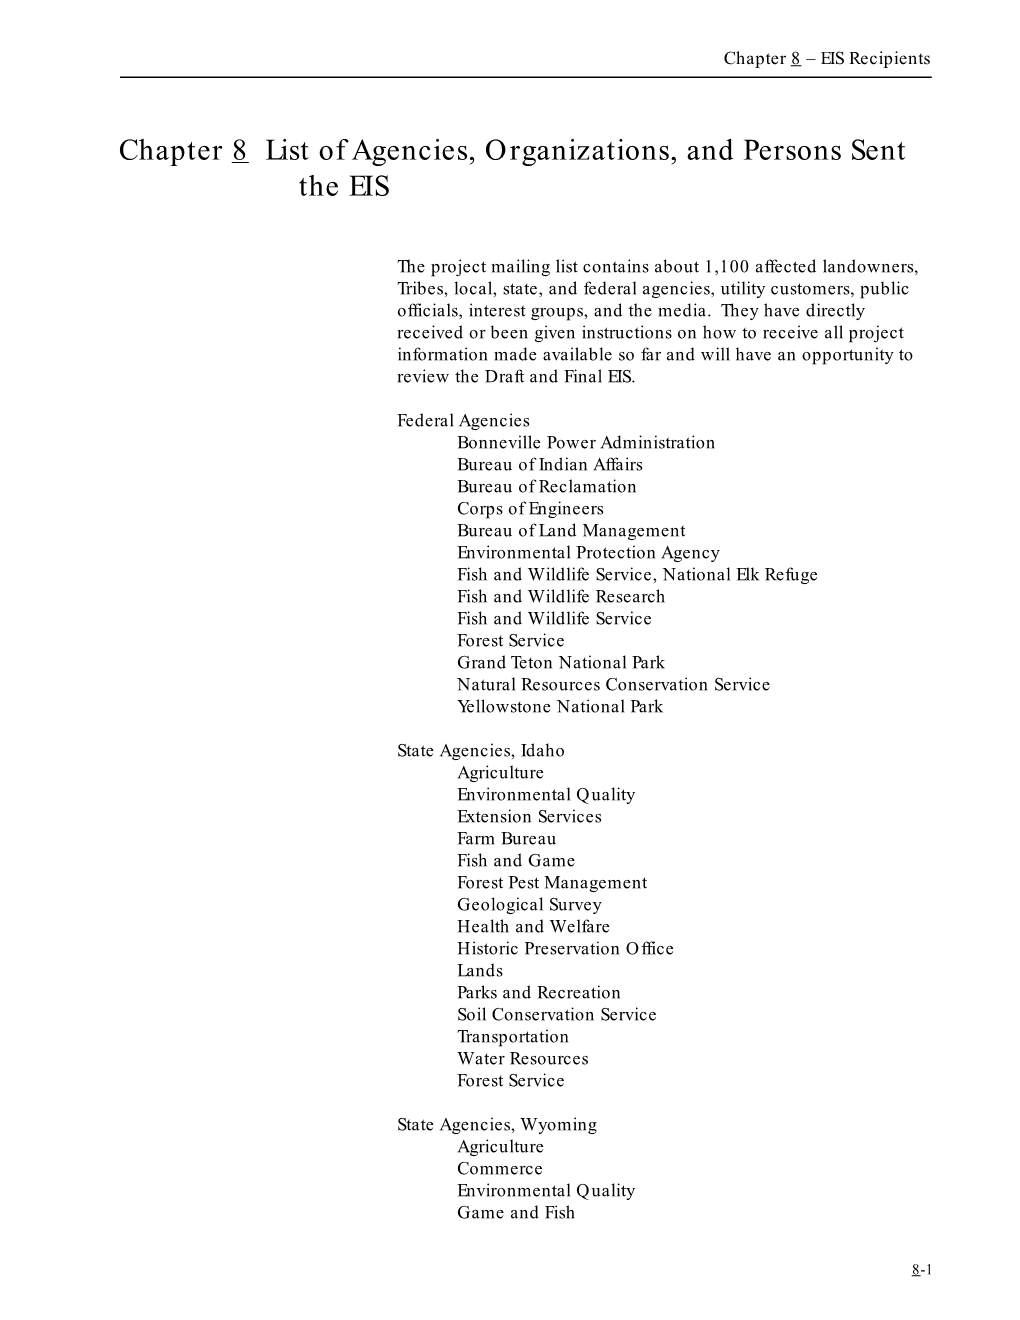 Chapter 8 List of Agencies, Organizations, and Persons Sent the EIS